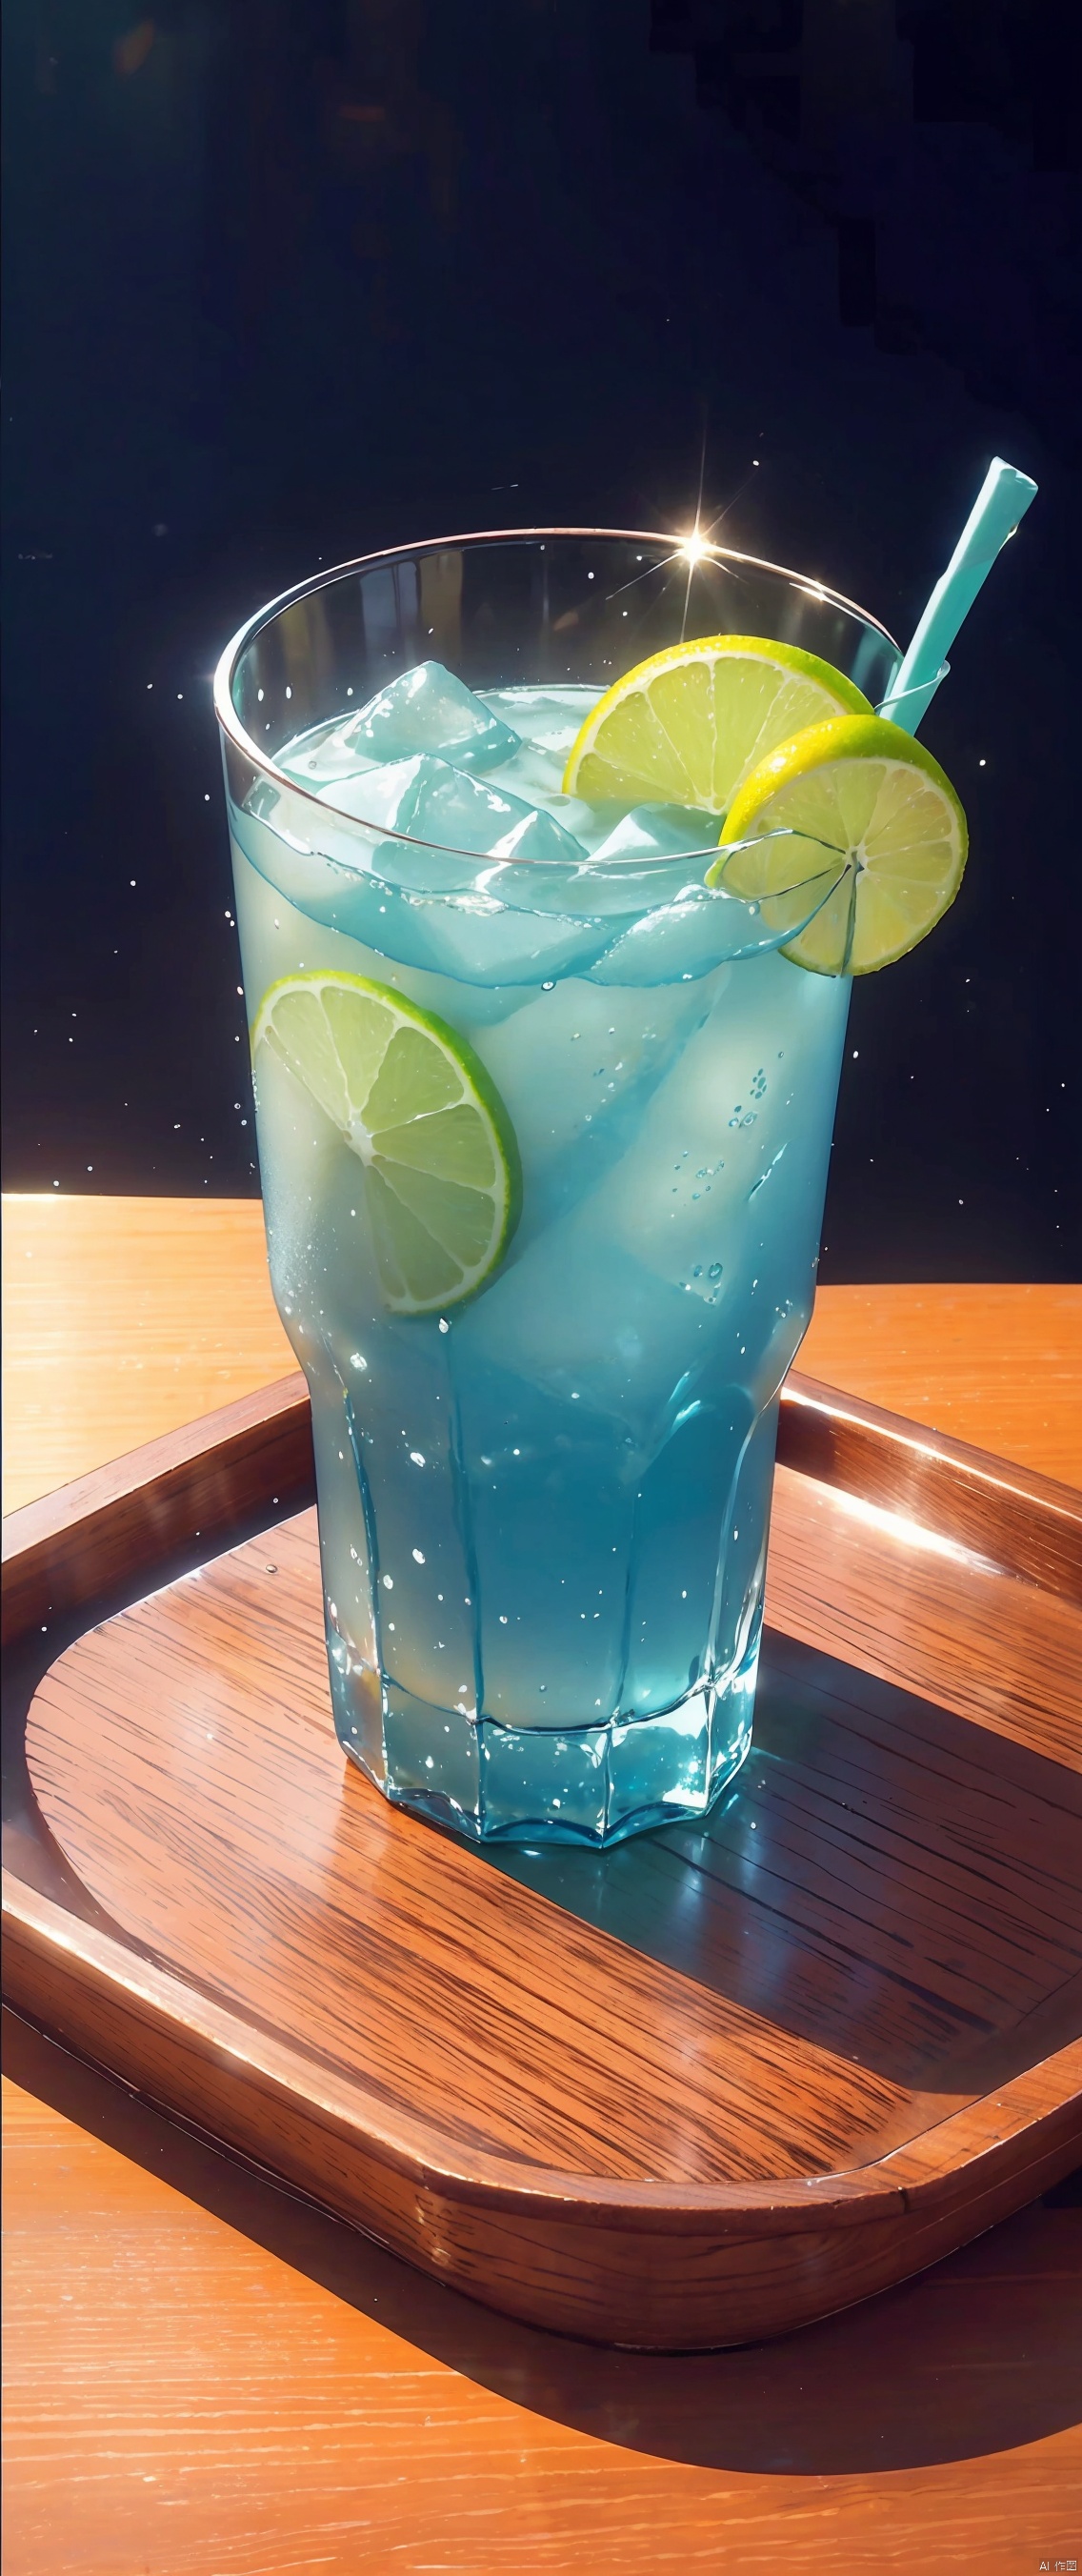 In summer,a cool iced drink,glass,good-looking glass,perfect glass,sparkling water,blue to green gradient,mint,lemon,placed on a wooden tray with a few pieces of watermelon next to it